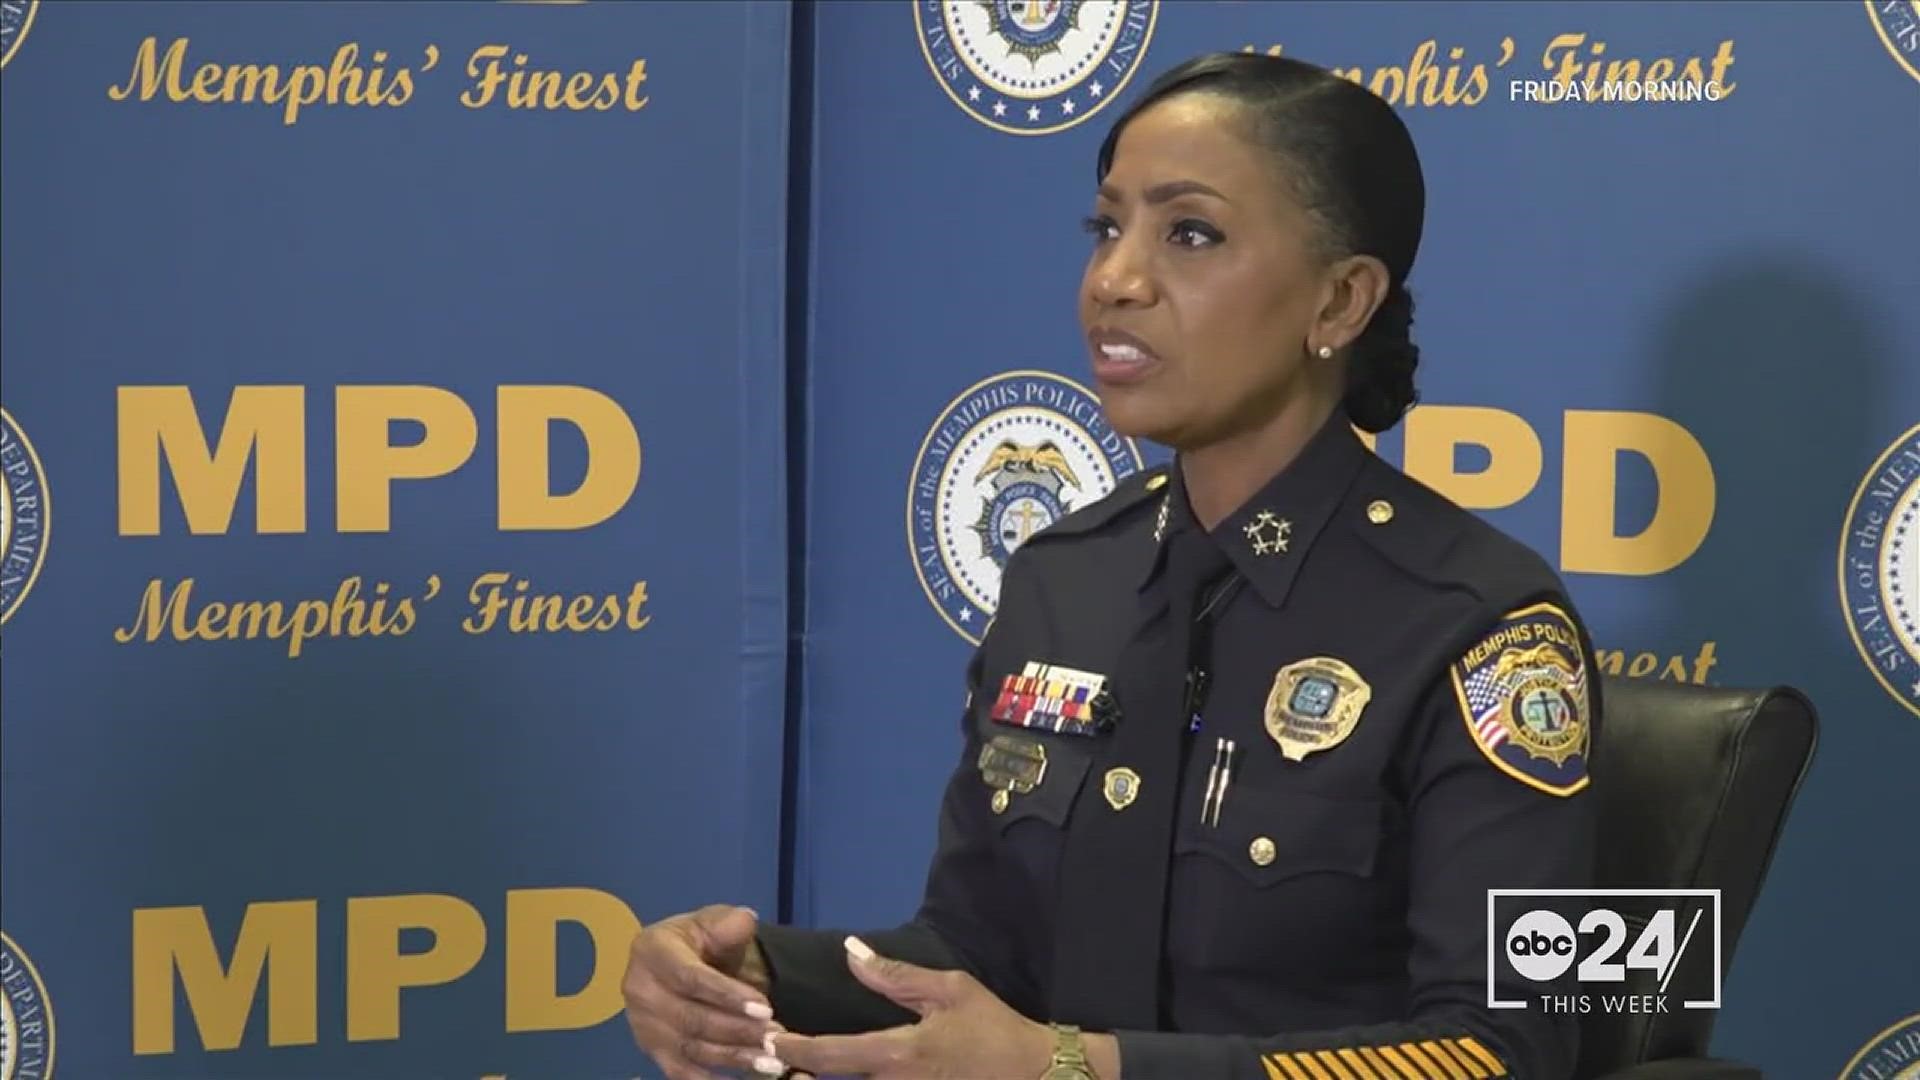 Memphis Police Chief C.J. Davis sat down with Richard Ransom on Friday morning to discuss the death of Tyre Nichols and how she hopes to institute change.